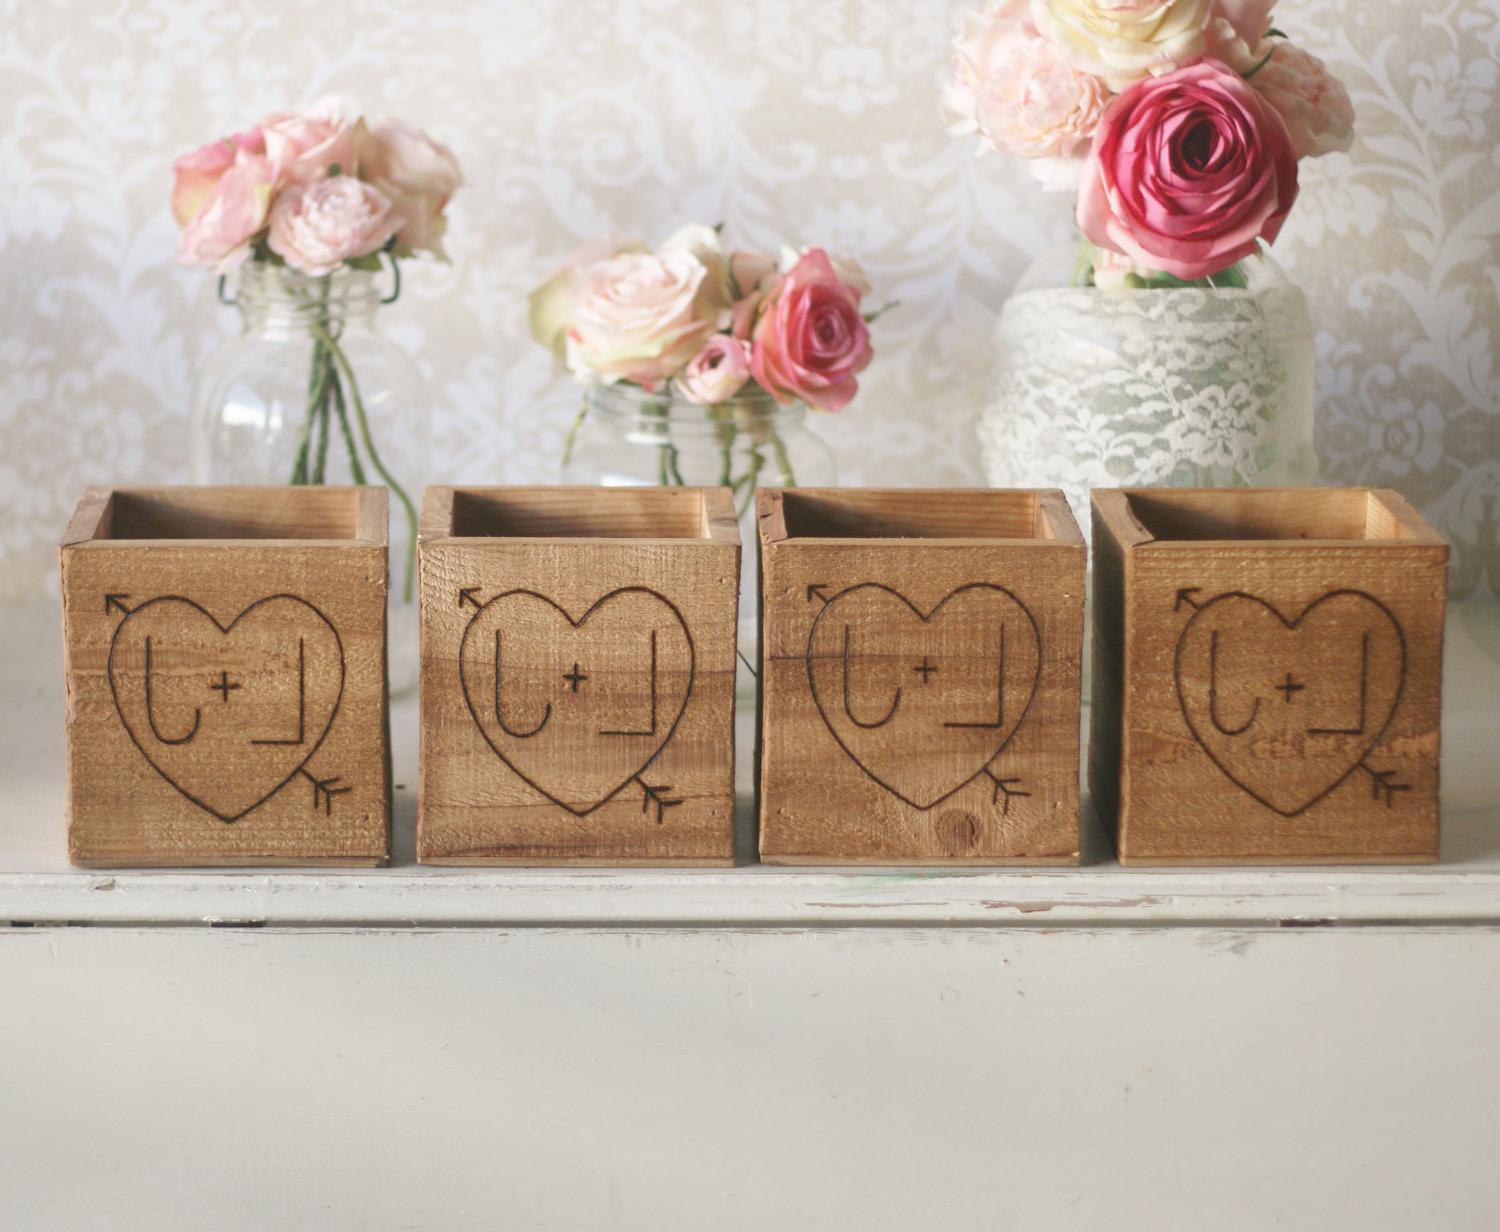 Rustic Wood Wedding Planter Centerpiece Vases Personalized Barn Wood